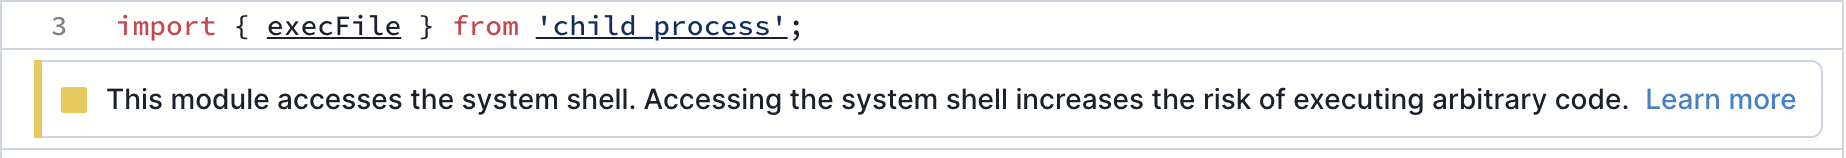 Screenshot of the Socket UI showing a warning that the module accesses the system shell.